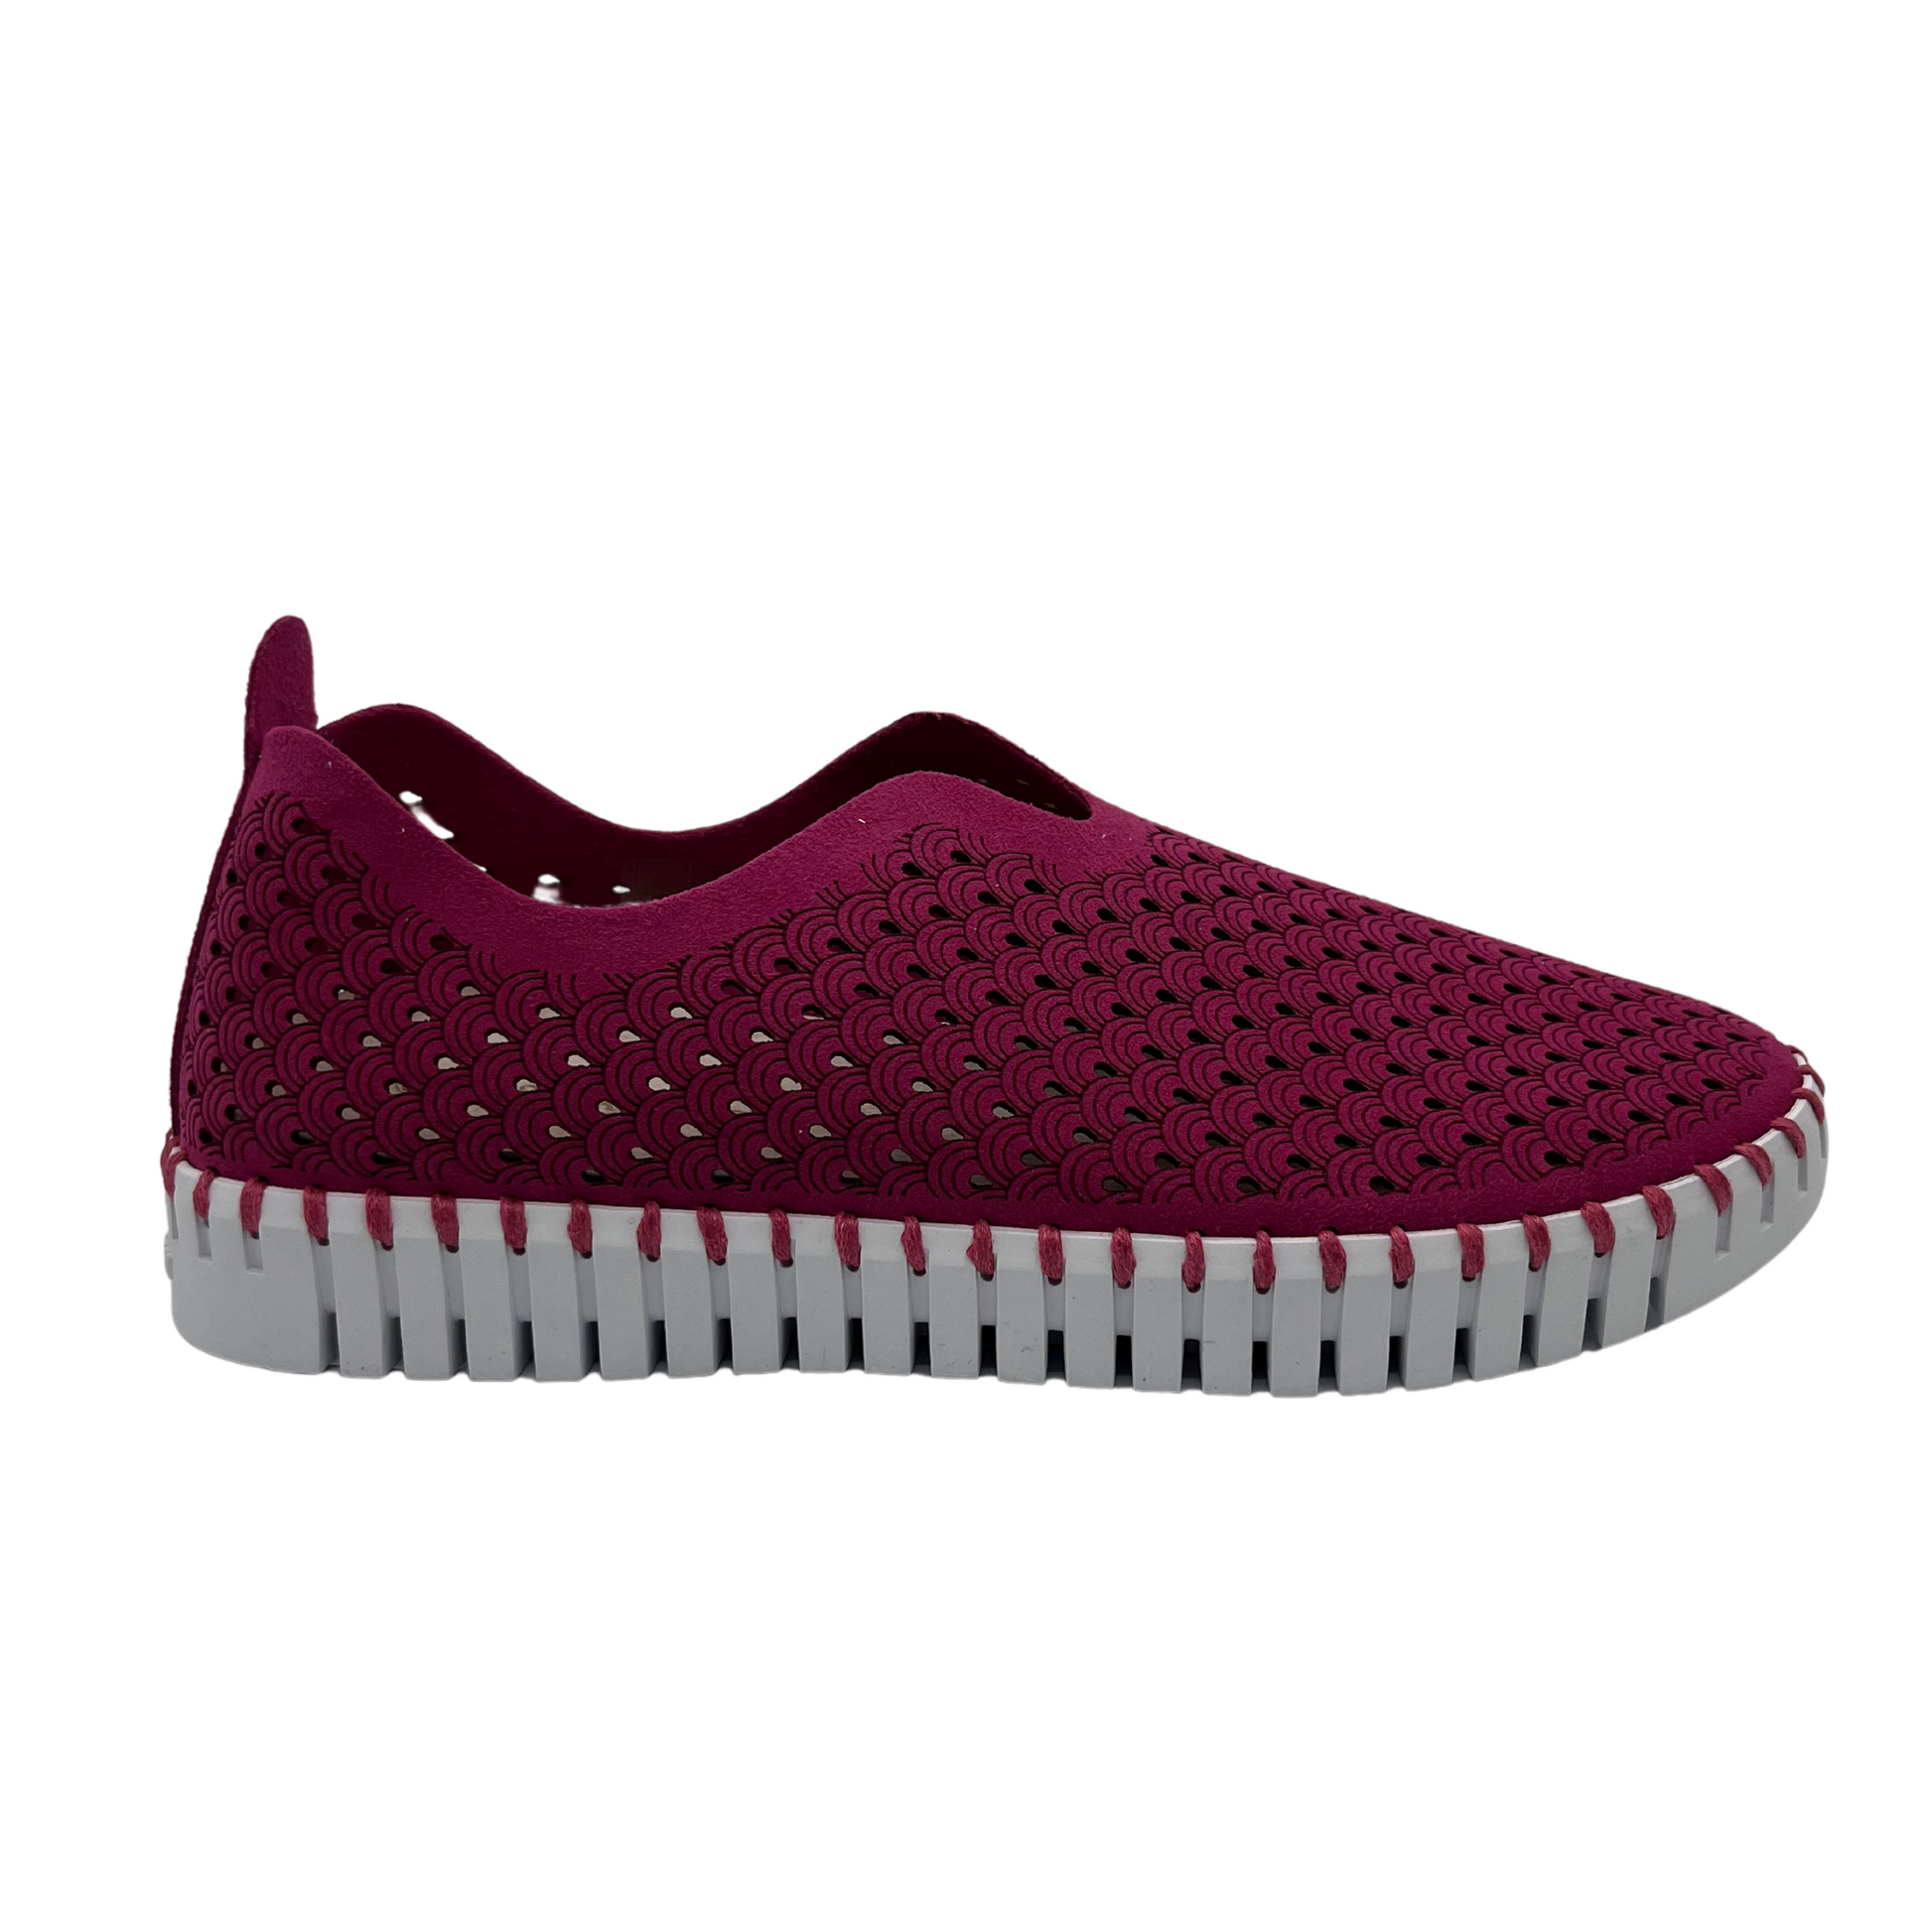 Right facing view of maroon embossed cutout slip on sneakers with white rubber outsole